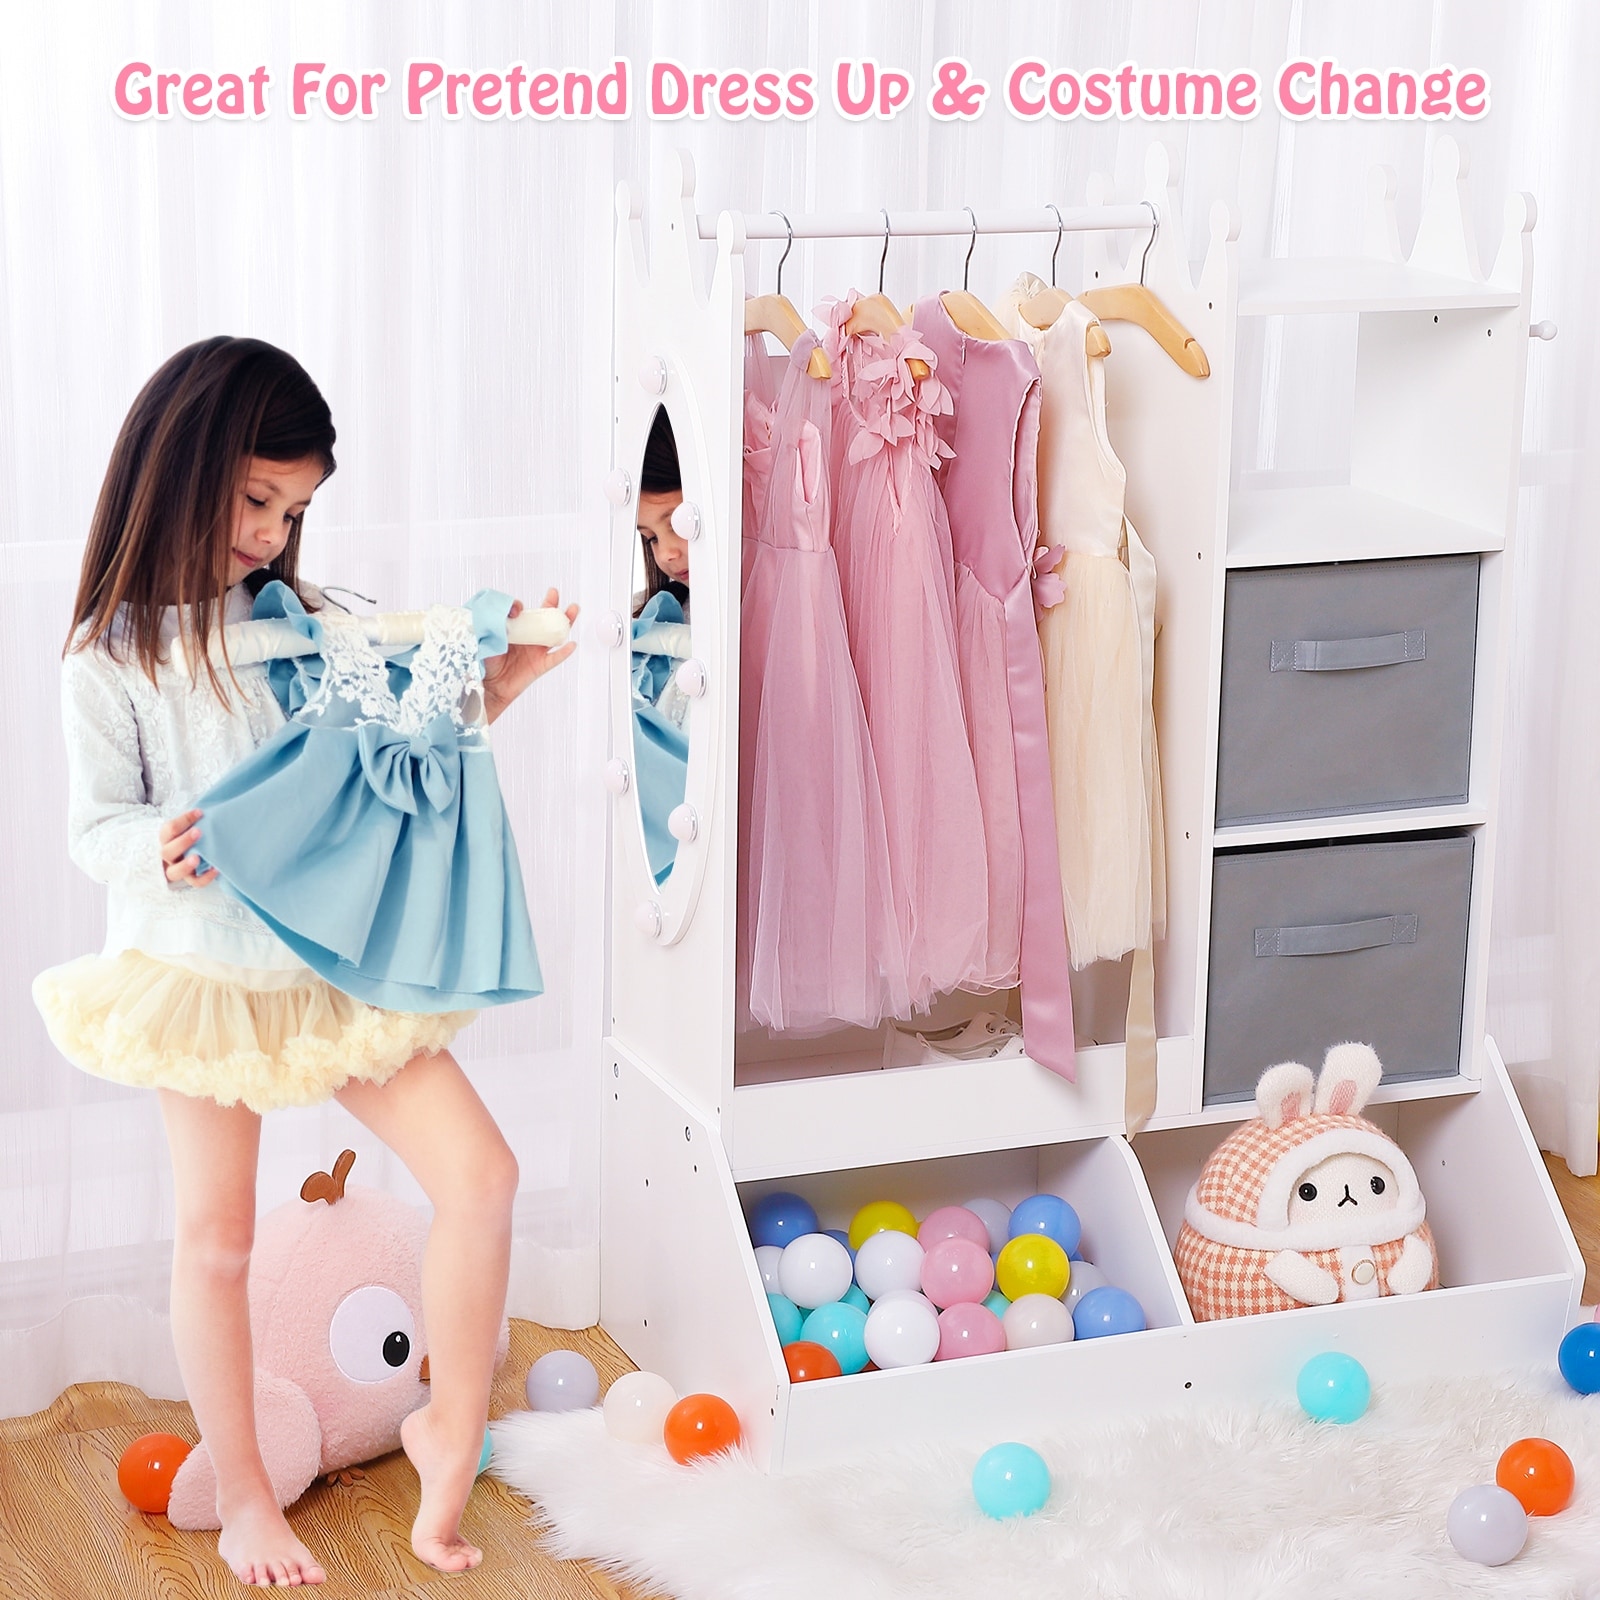 https://ak1.ostkcdn.com/images/products/is/images/direct/ba1fc02c64fd3c714931a7dcfe0ec9f59020b661/Girls%27-Dress-Up-Storage-with-Light-%26-Mirror%2CKids-Clothing-Rack%2C-Storage-Bin%2C-and-Hanging-Armoire-Closet.jpg